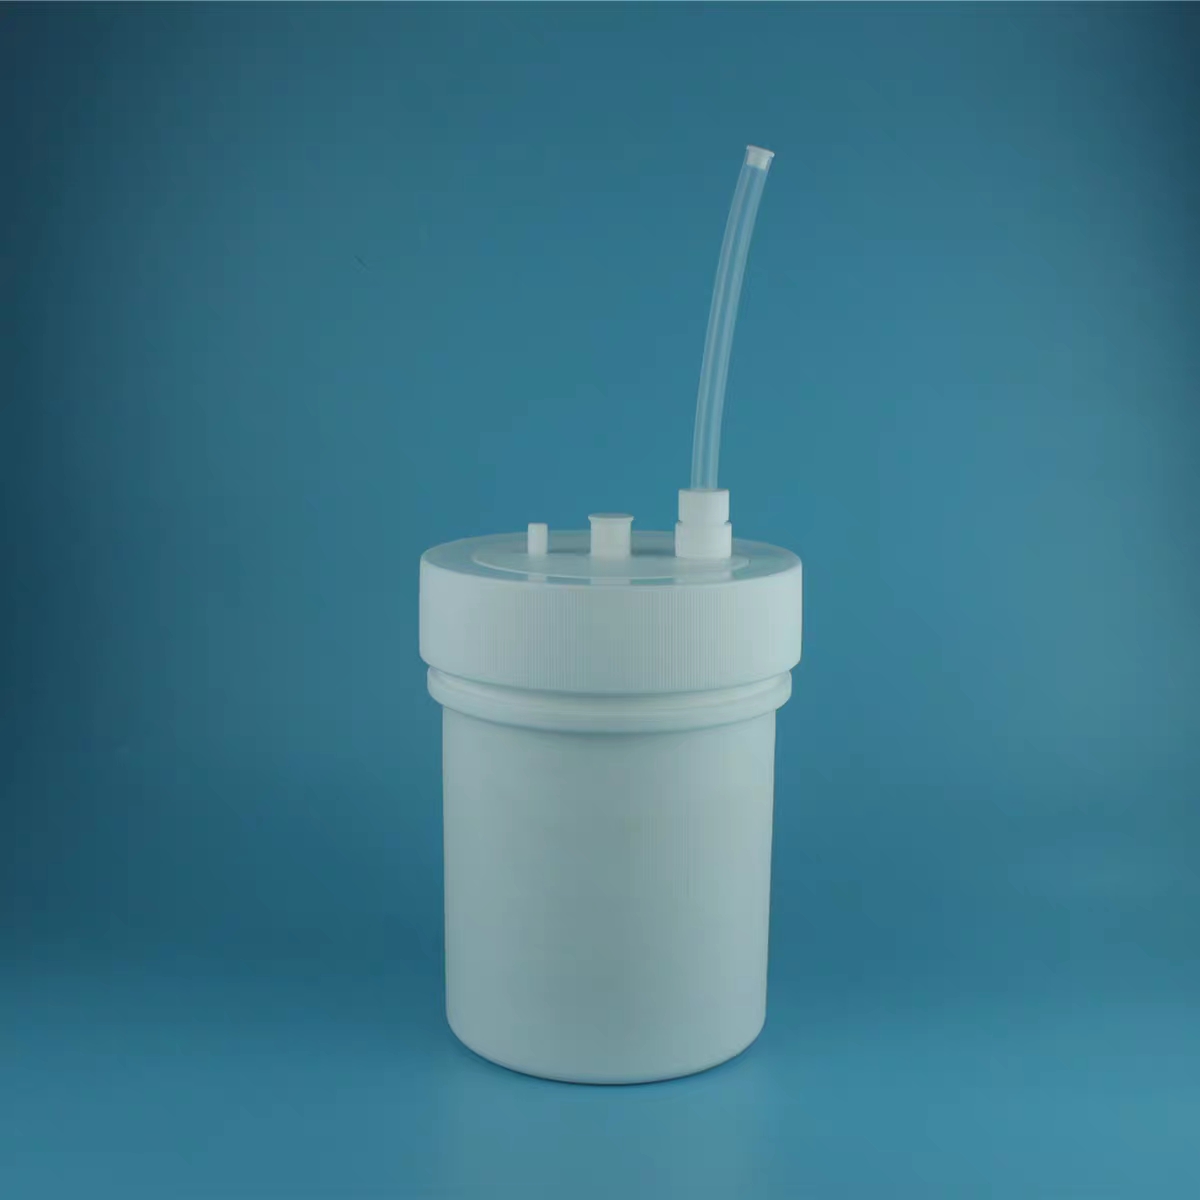 Nanjing Binglab PFA Vials cleaning system PTFE cleaner laboratory utensils cleaning canister